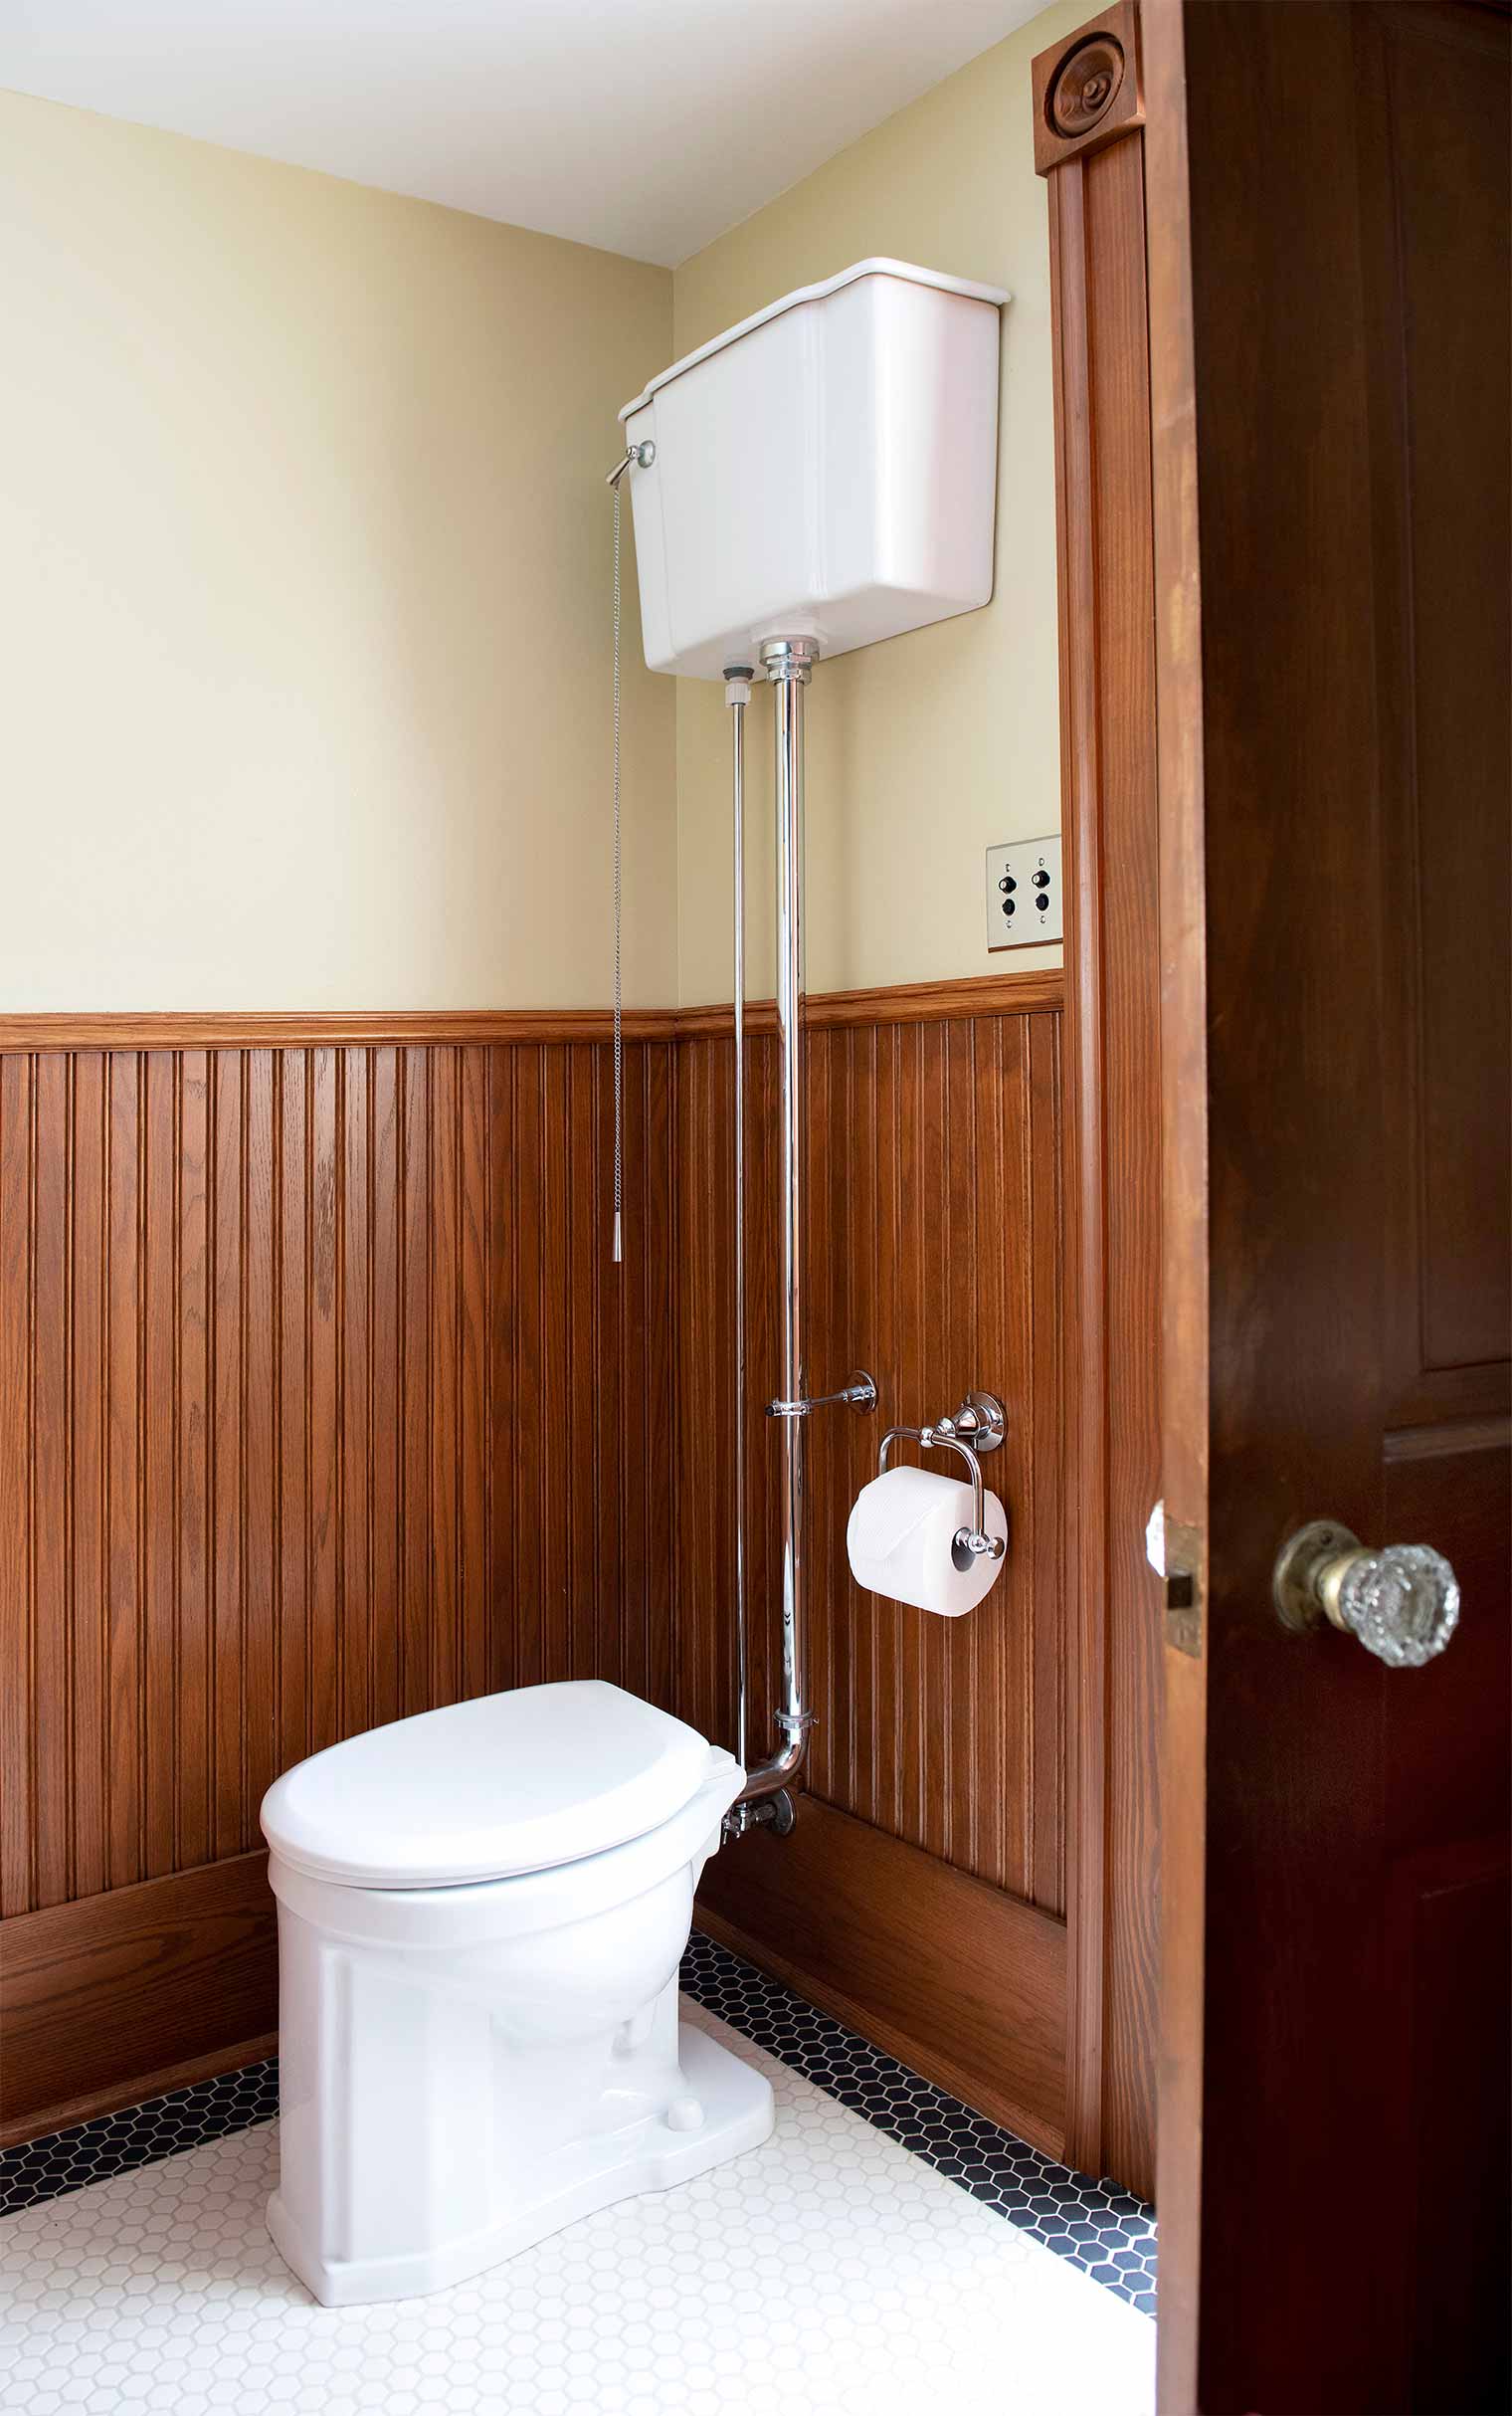 bathroom remodel in a Des Moines Victorian home renovation by Silent Rivers features tank style toilet